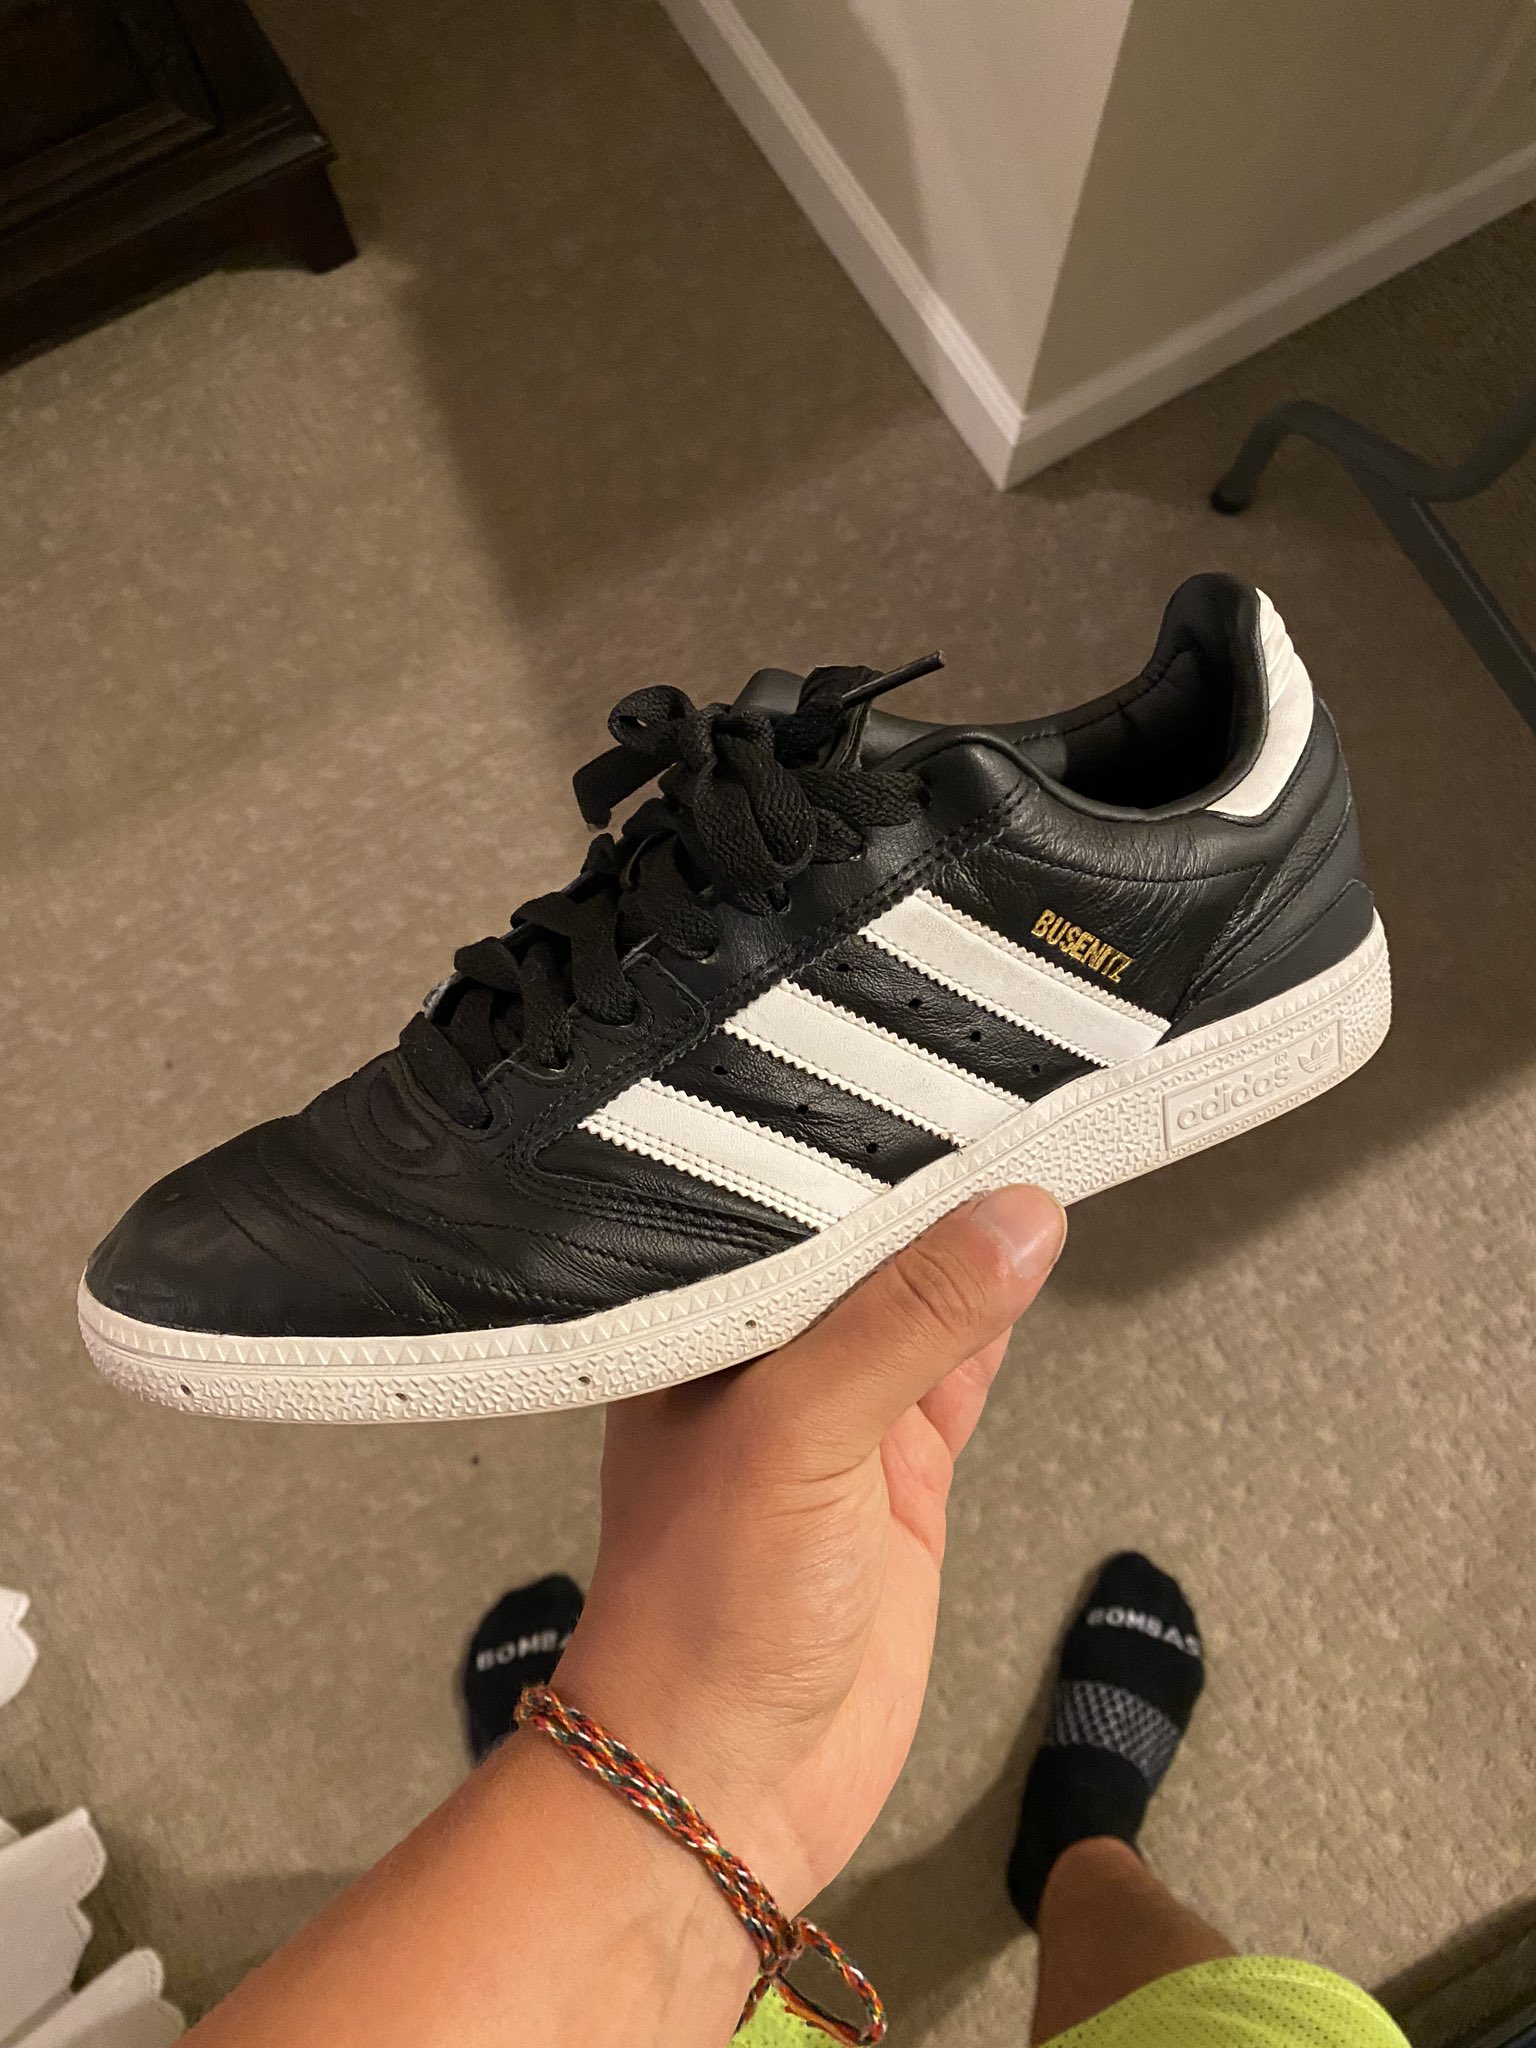 Jake Woolf on Twitter: of best sneaker purchases ever—Adidas Busenitz the ostrich leather upper https://t.co/V9l017IeGo" / Twitter